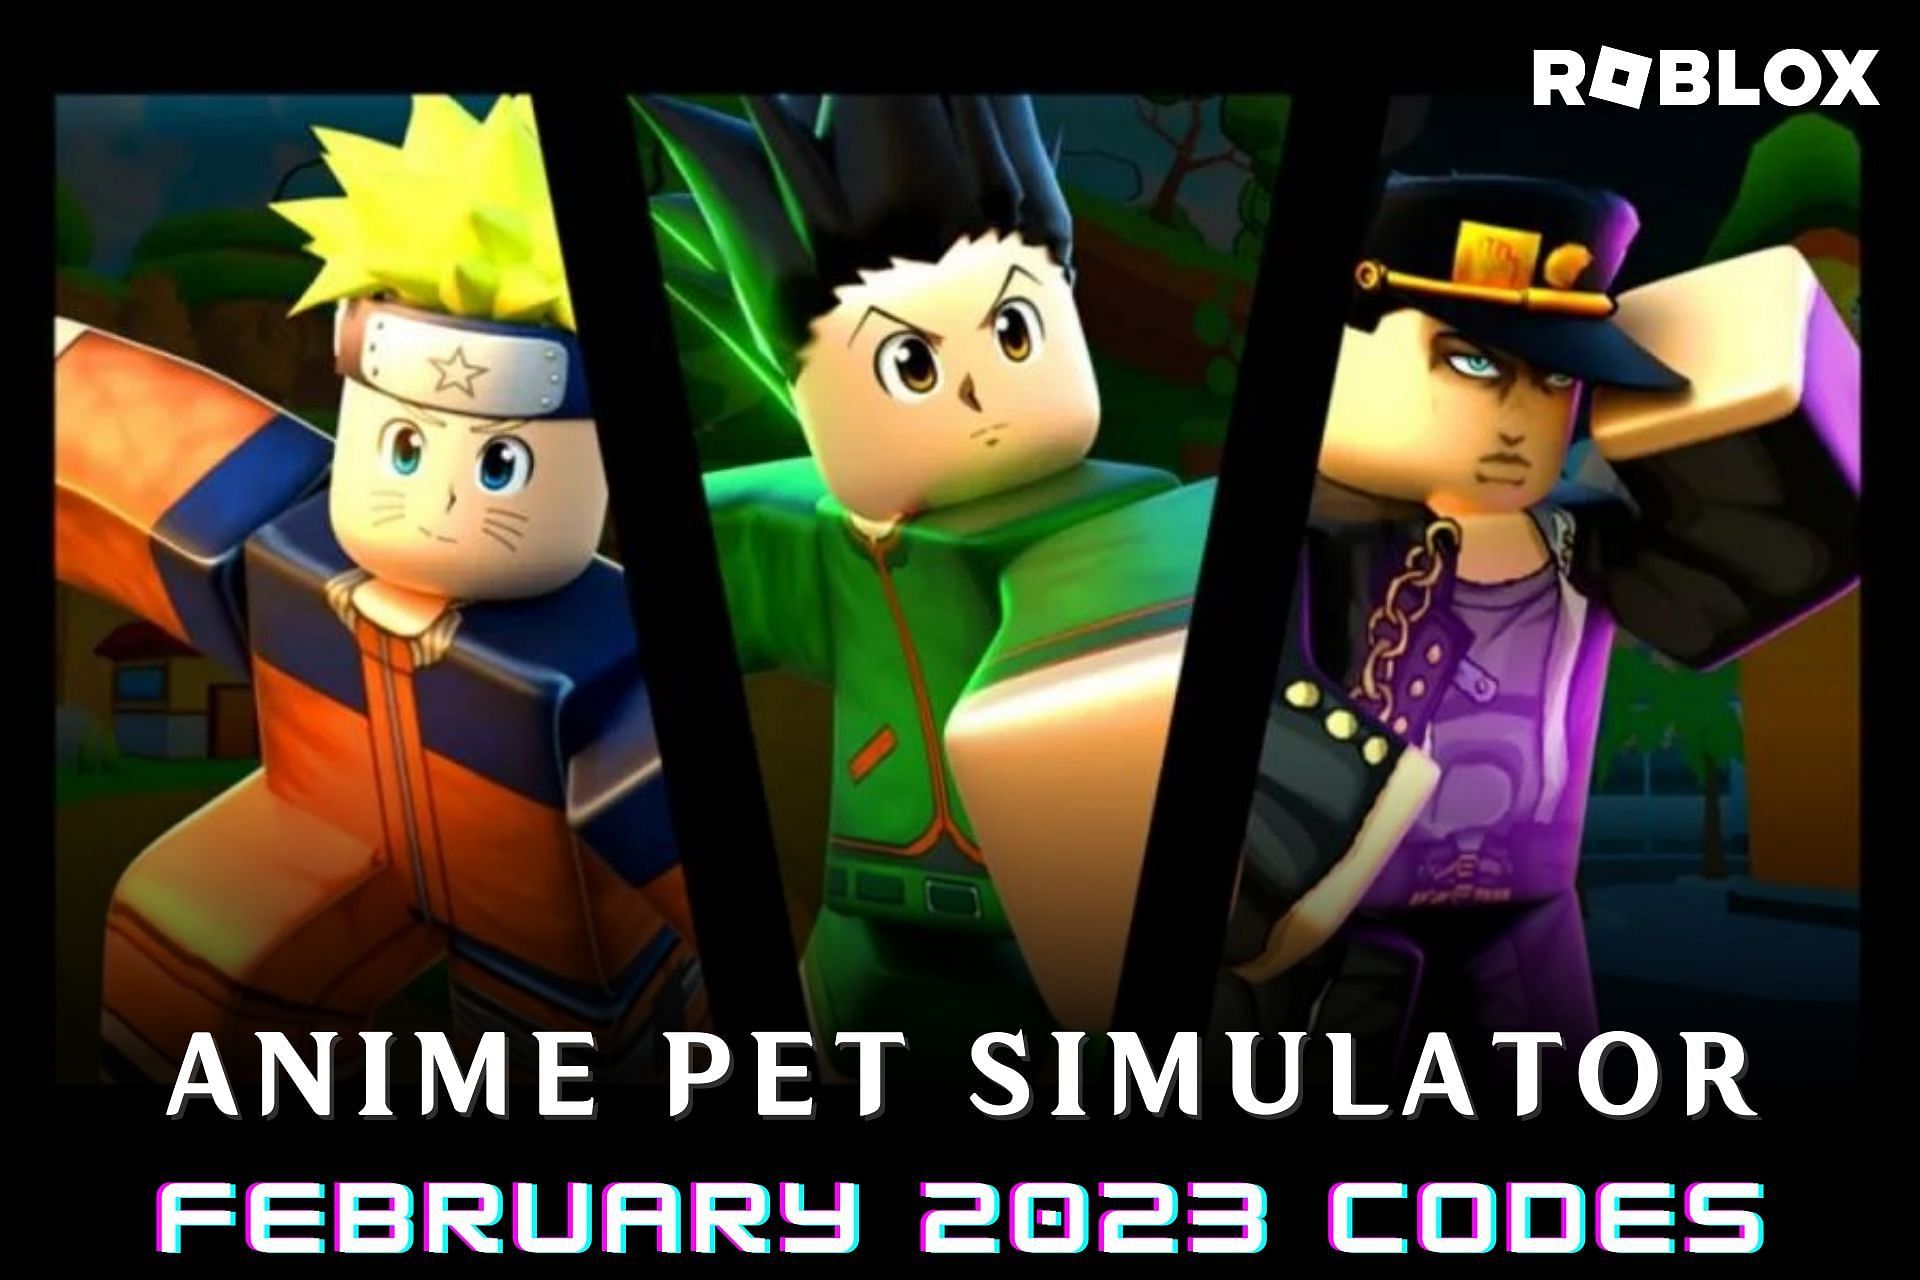 NEW* ALL WORKING CODES FOR PET SIMULATOR X FEBRUARY 2023! ROBLOX